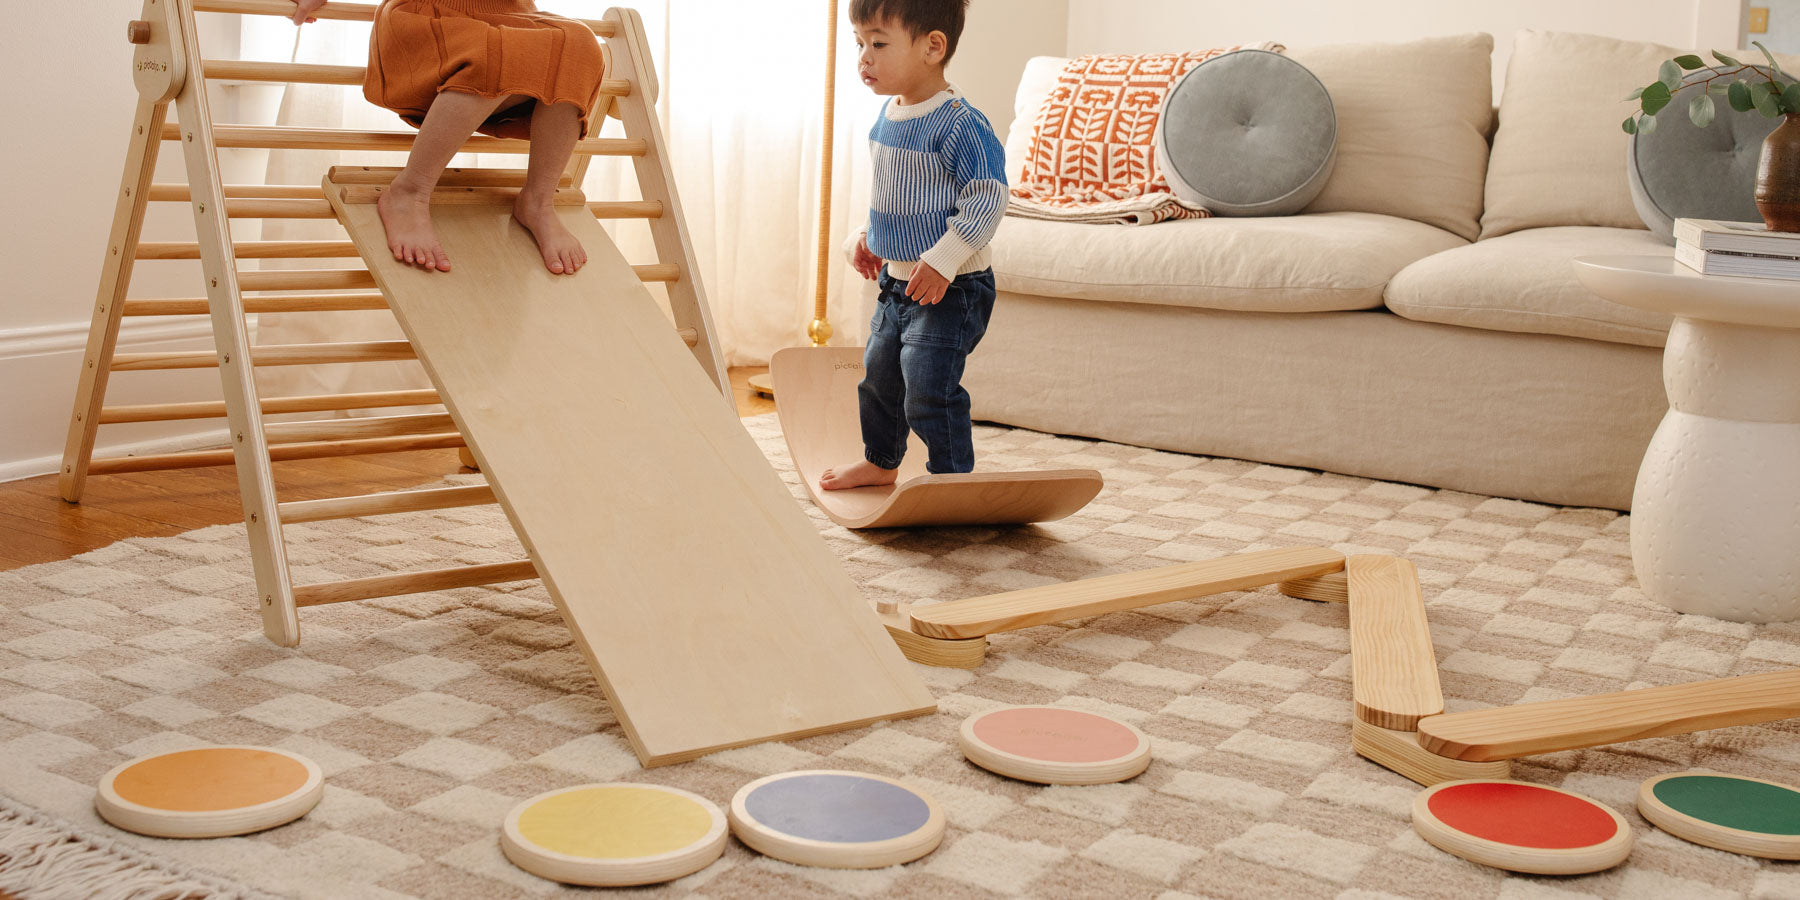 montessori wooden toys in the playroom for kids